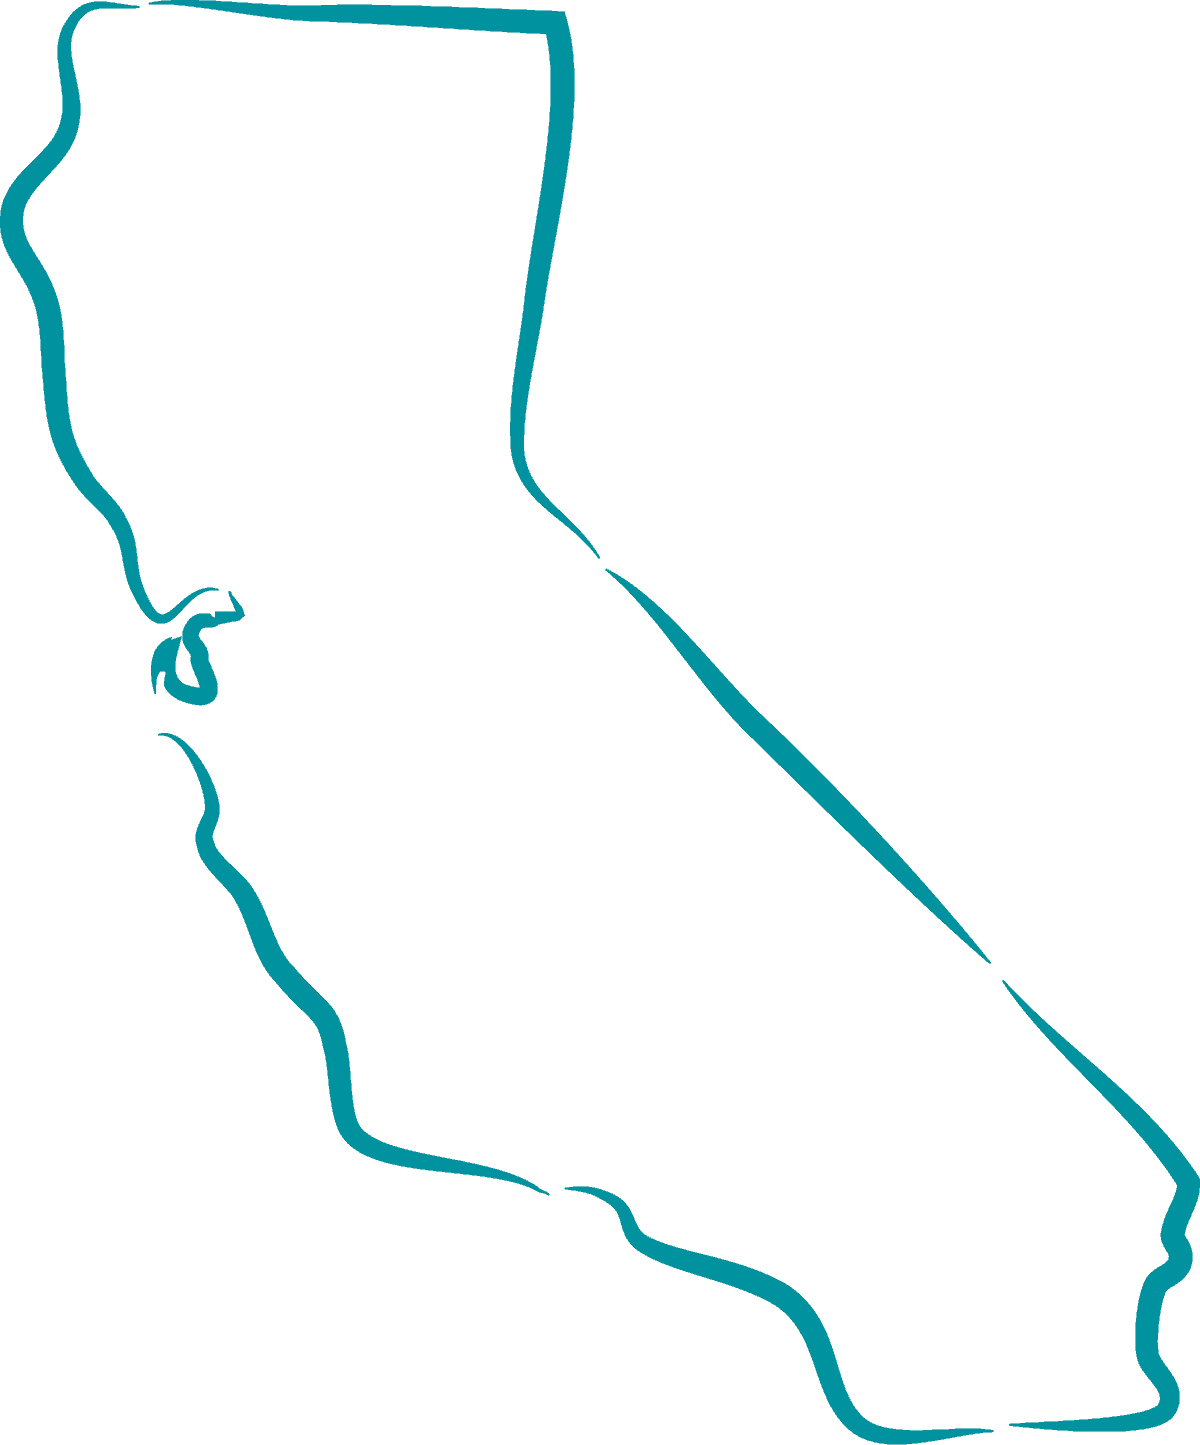 This is a teal illustrated outline of the state of California.